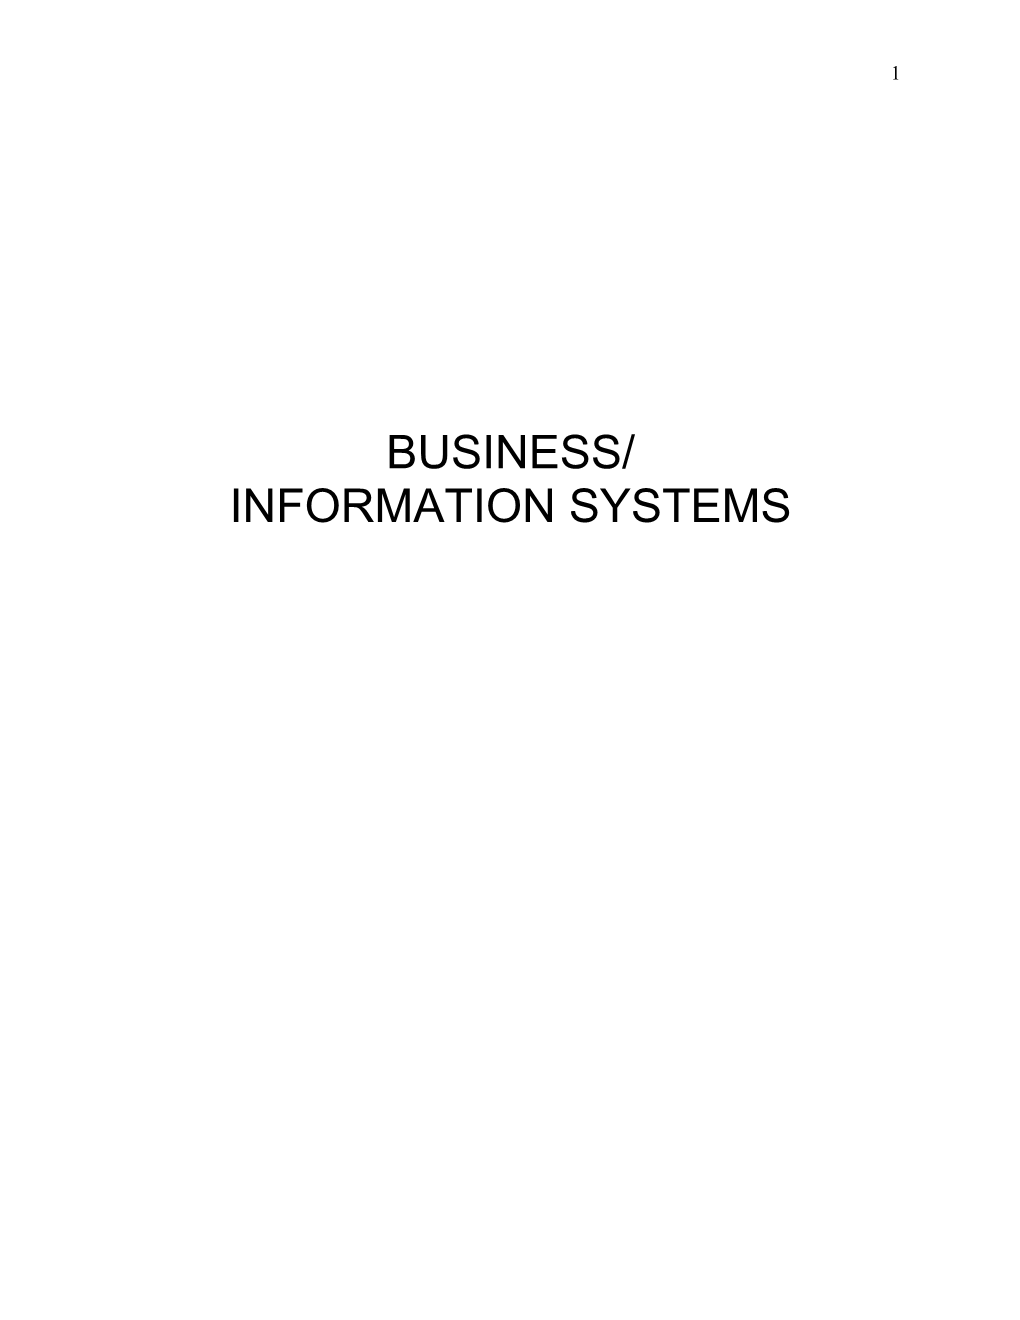 Business/Information Systems